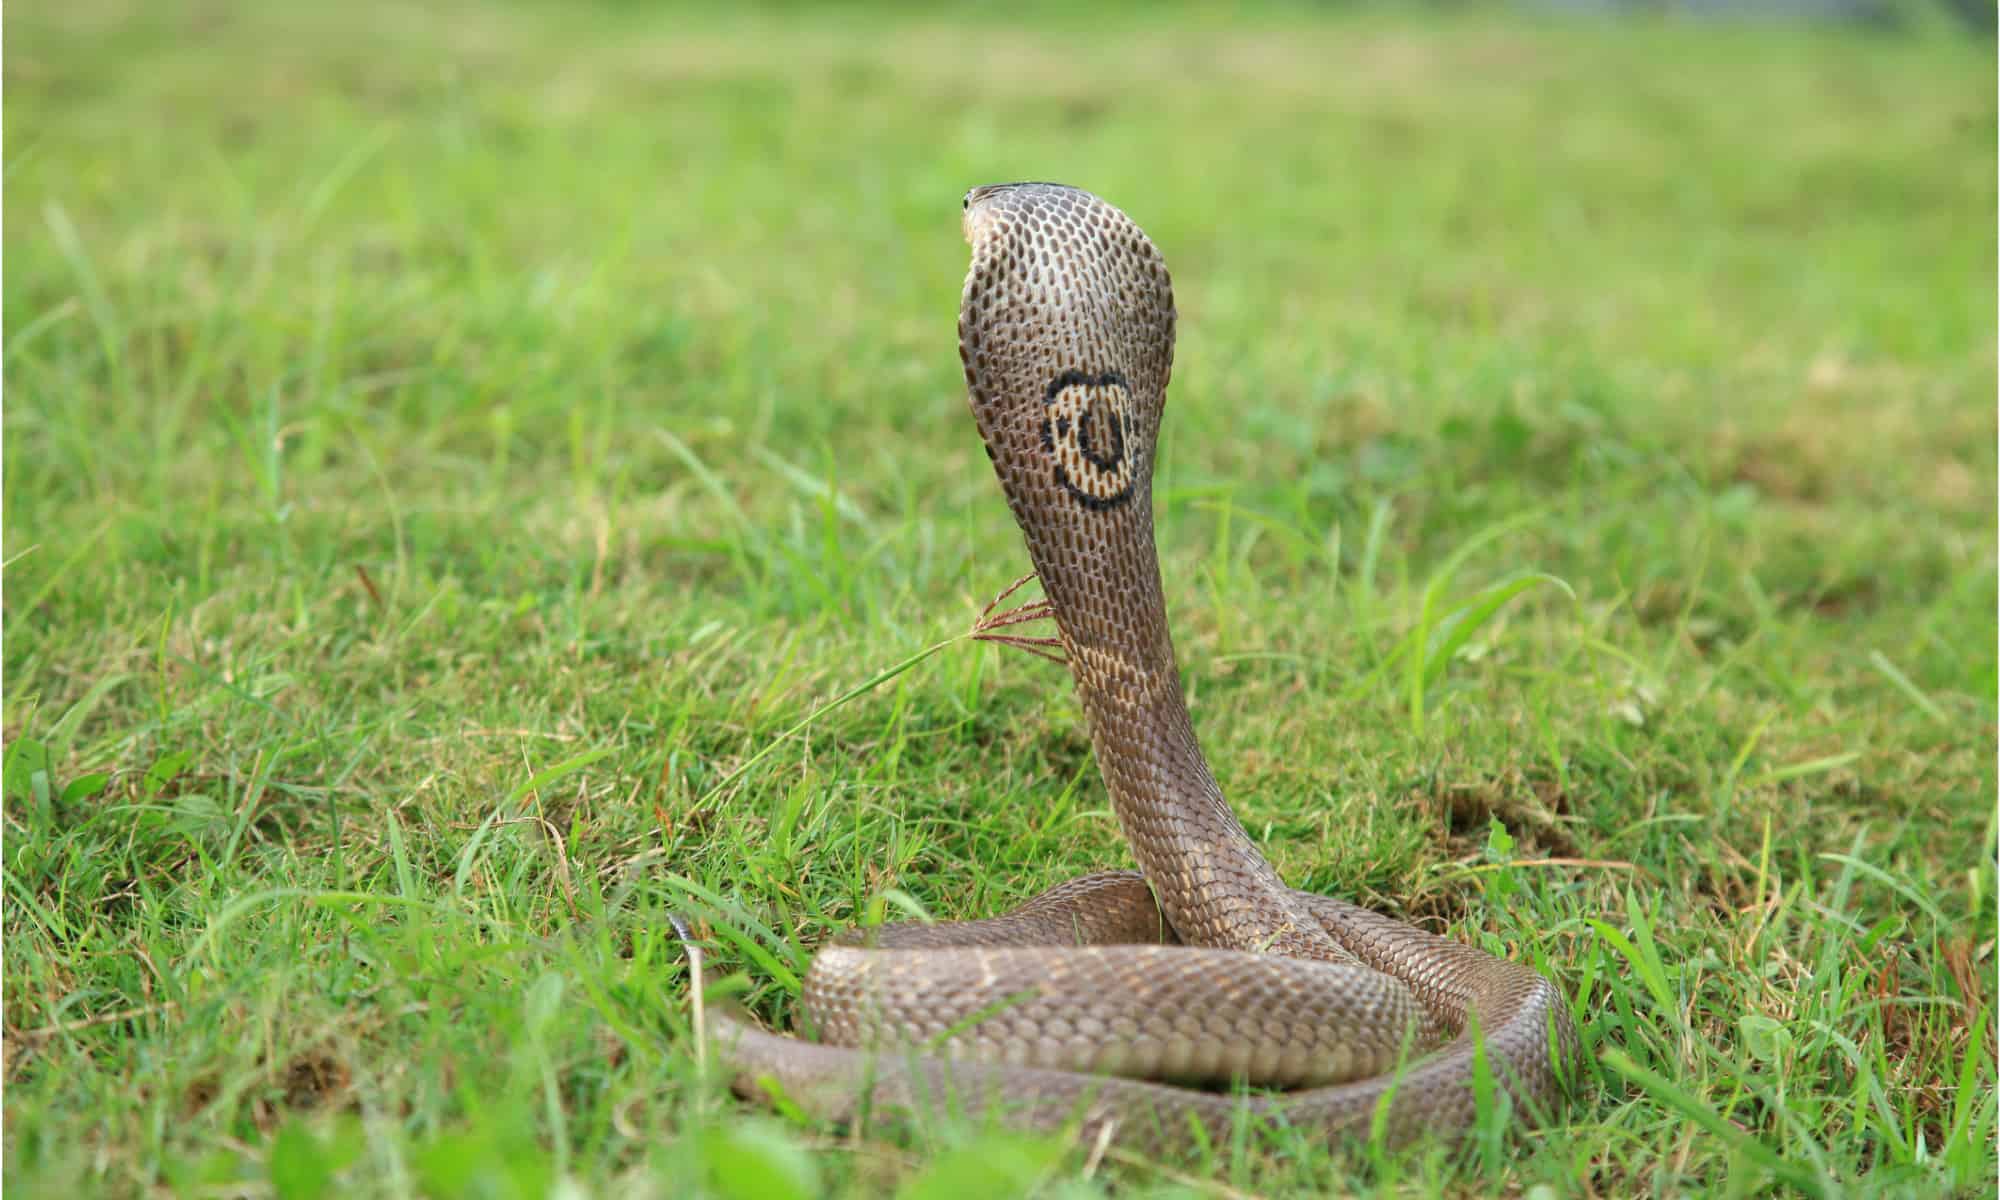 5 Facts About The King Cobra - Reptiles Magazine